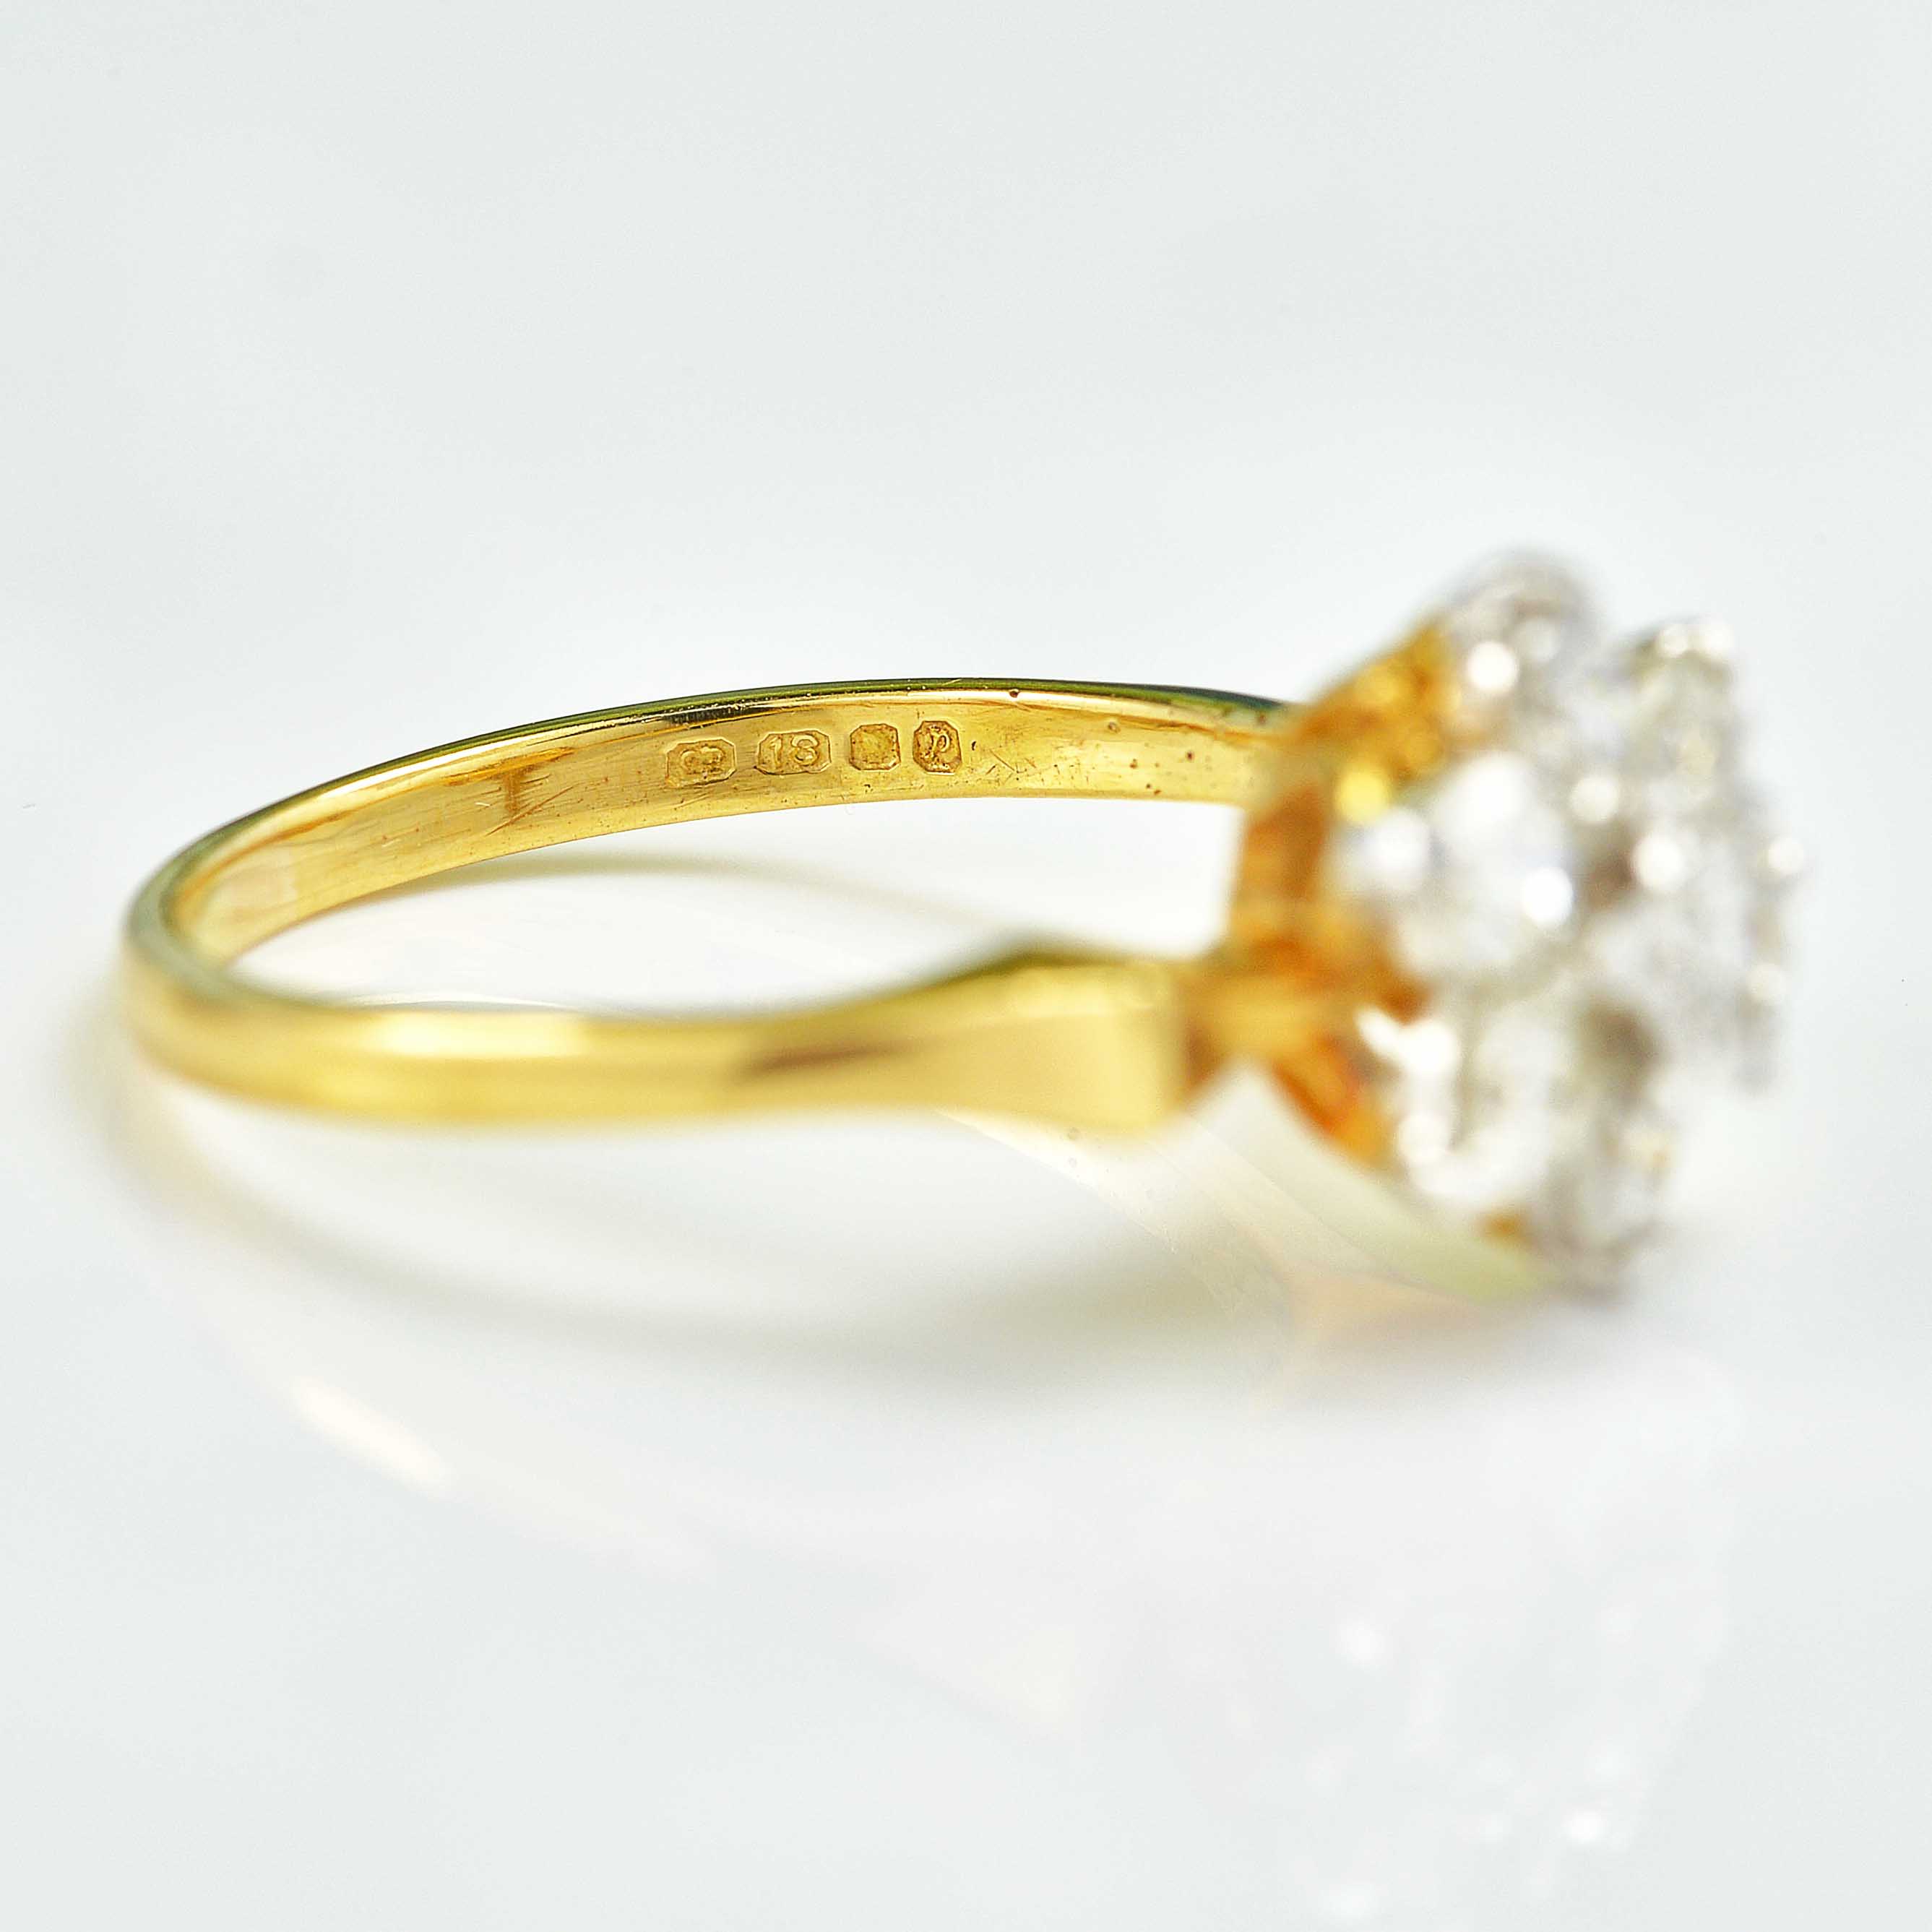 Ellibelle Jewellery 1970s 18ct Gold Diamond Flower Daisy Cluster Ring (0.70cts)